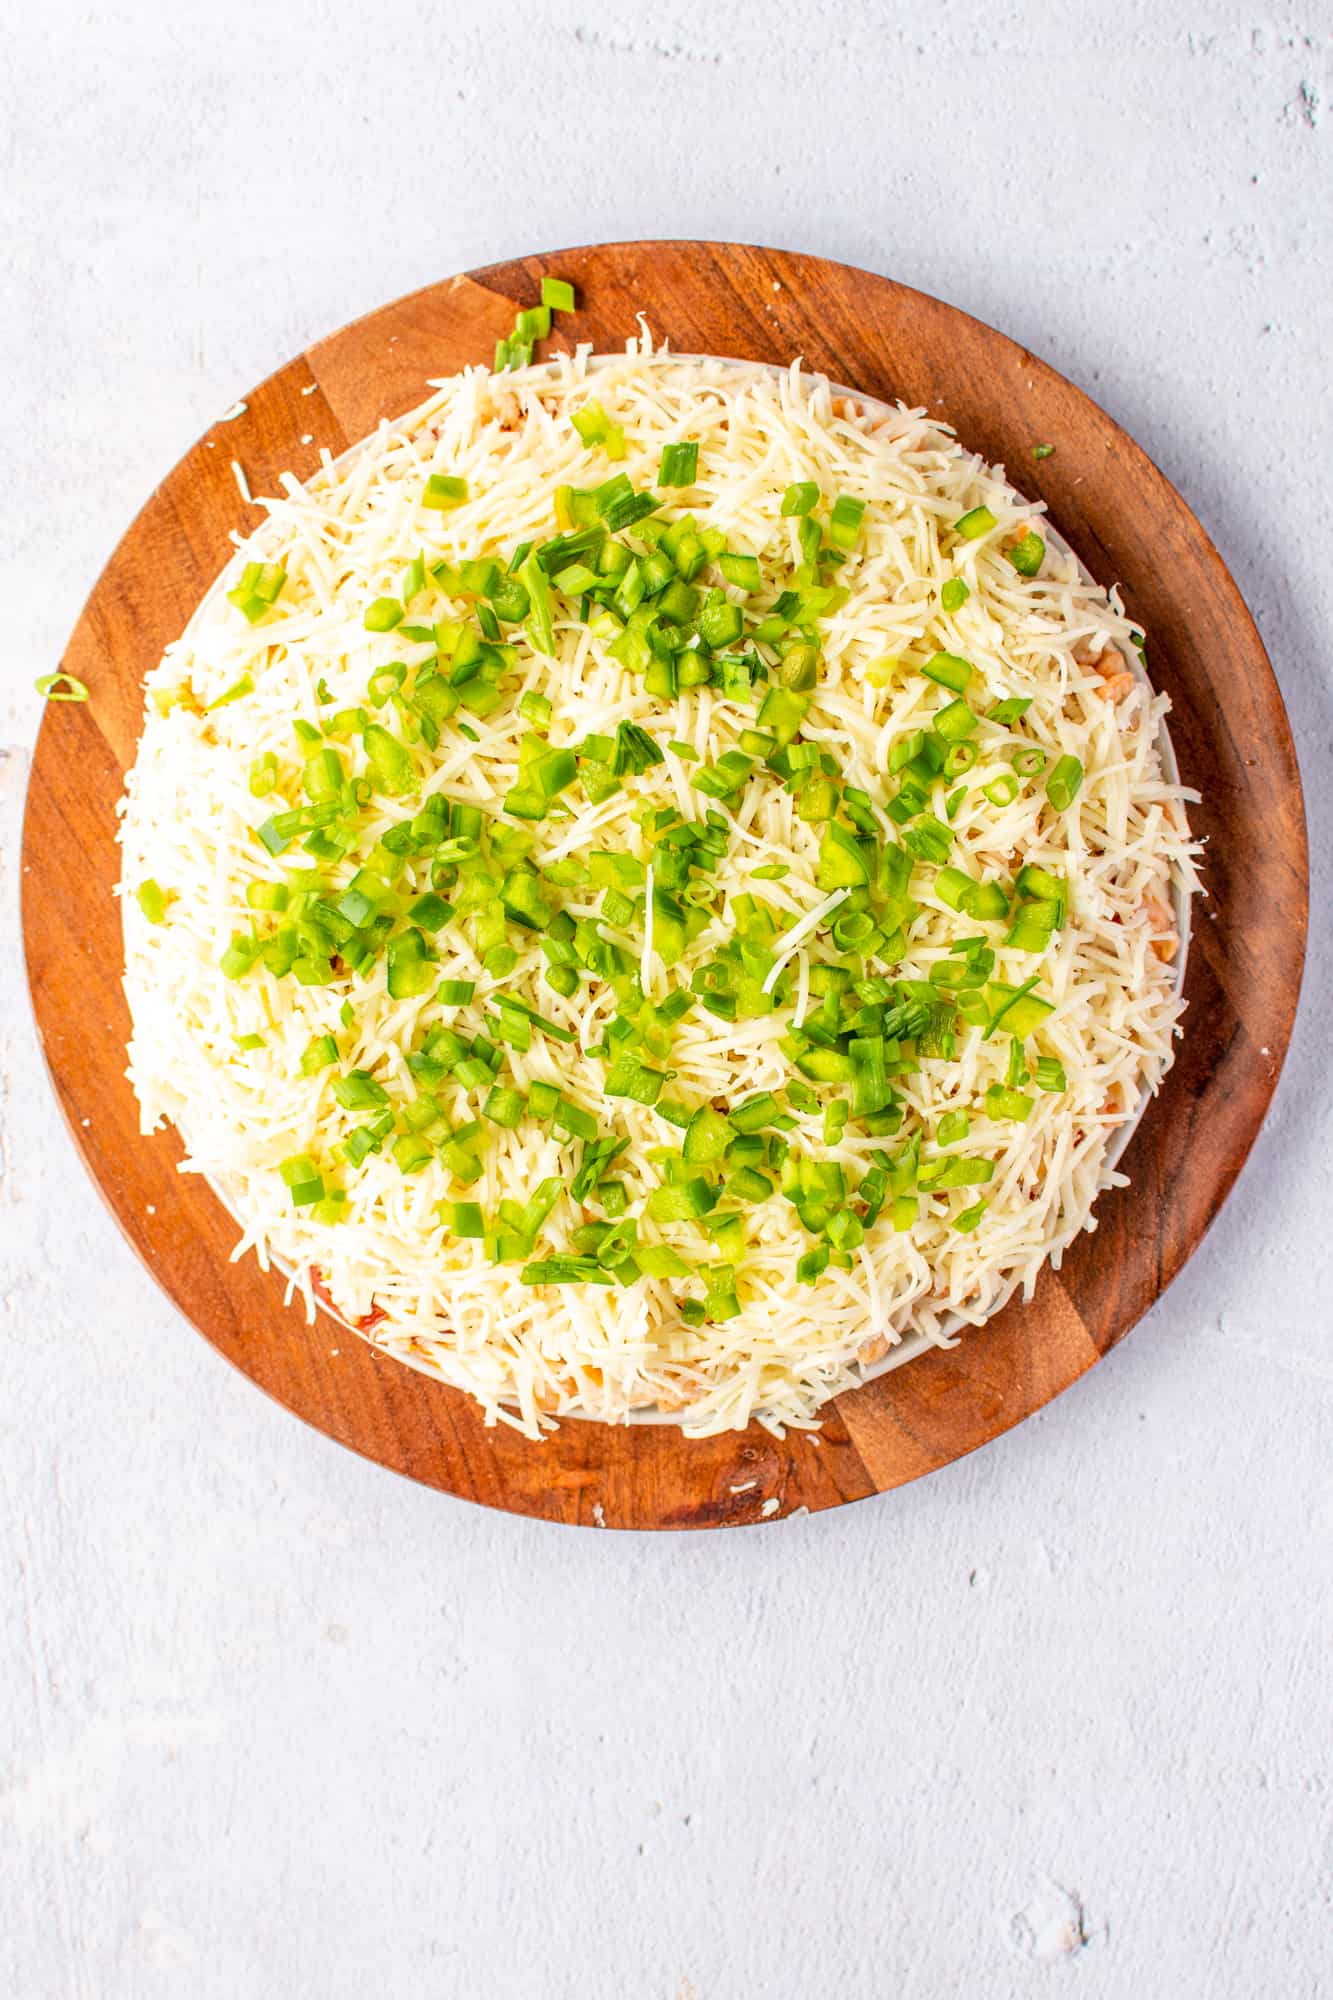 shredded mozzarella, green peppers and green onions on top of seafood layers of the dip.